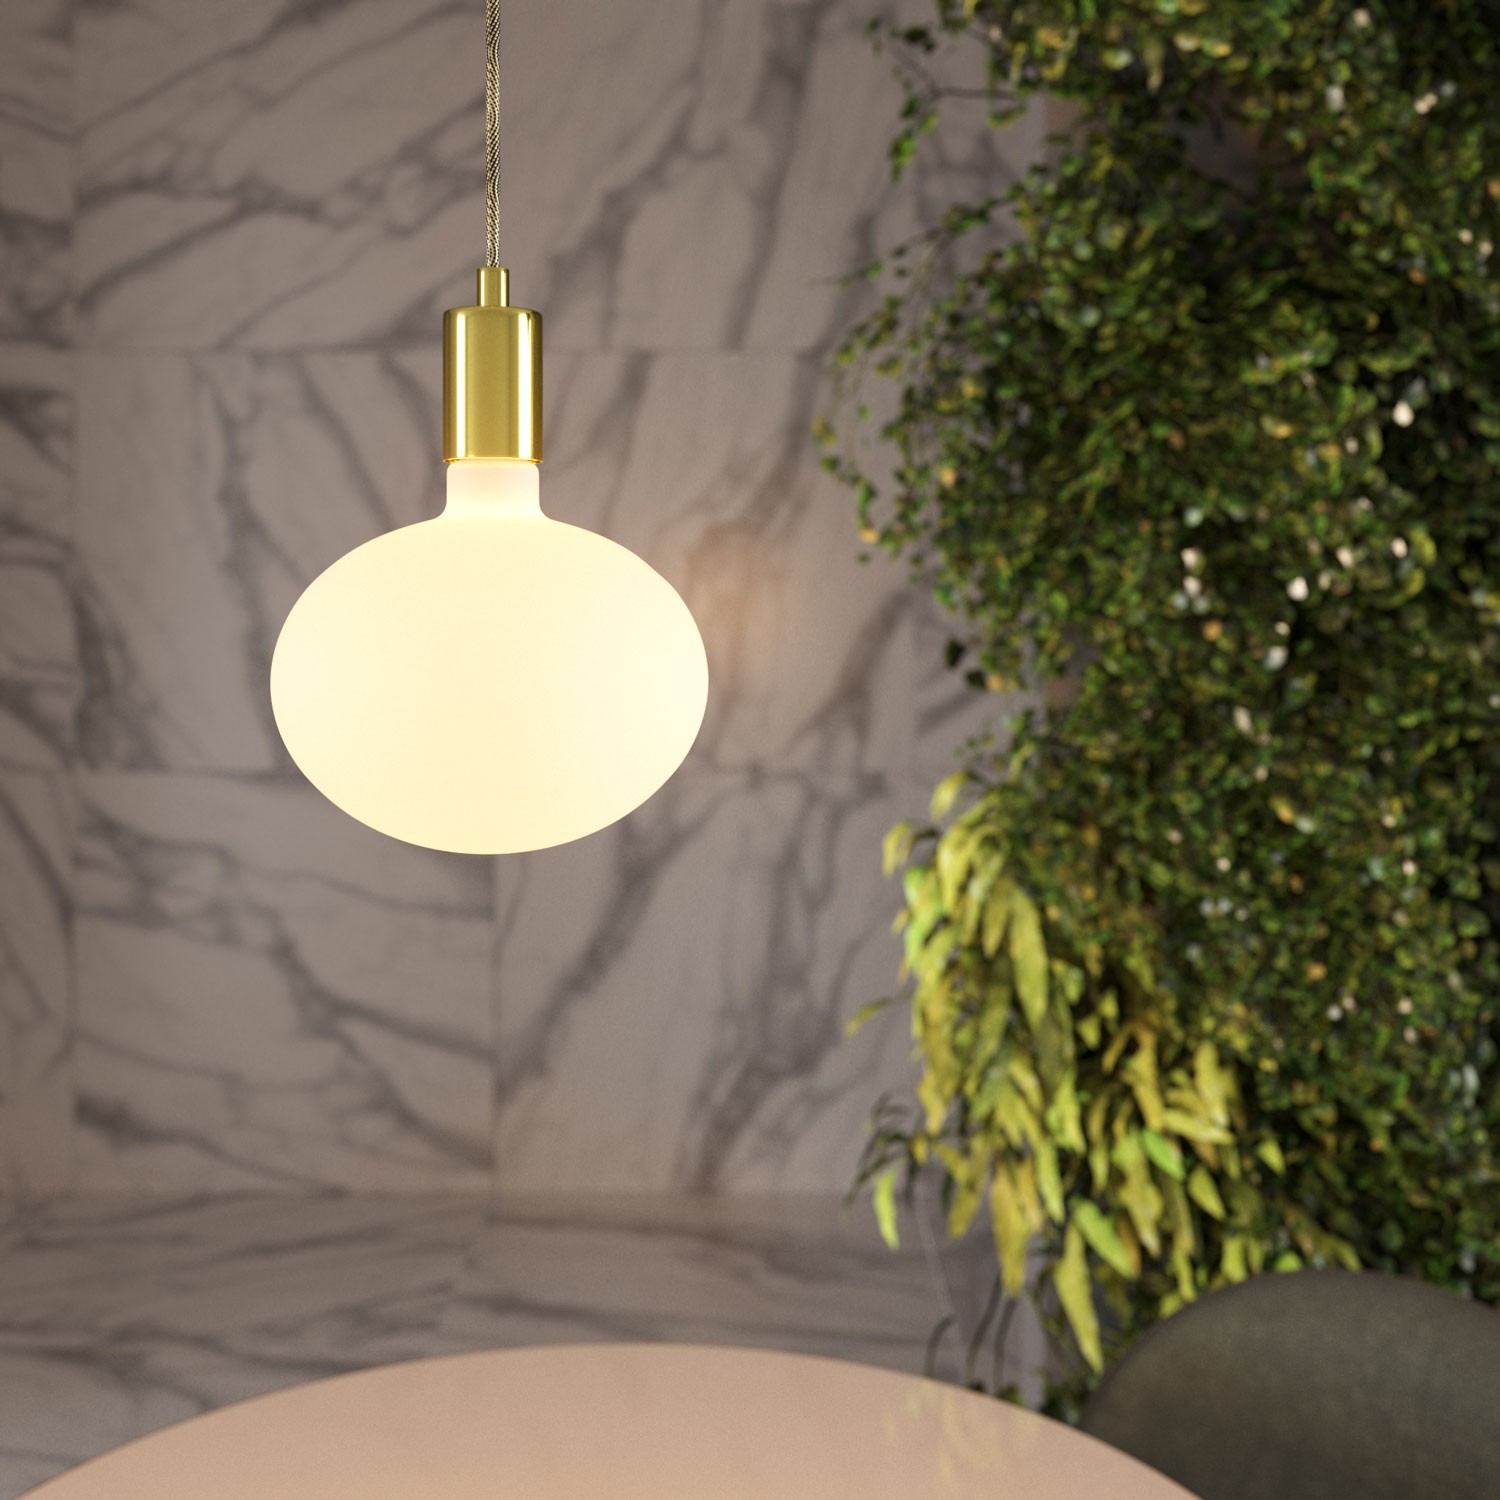 Pendant lamp with textile cable and contrasting metal details - Made in Italy